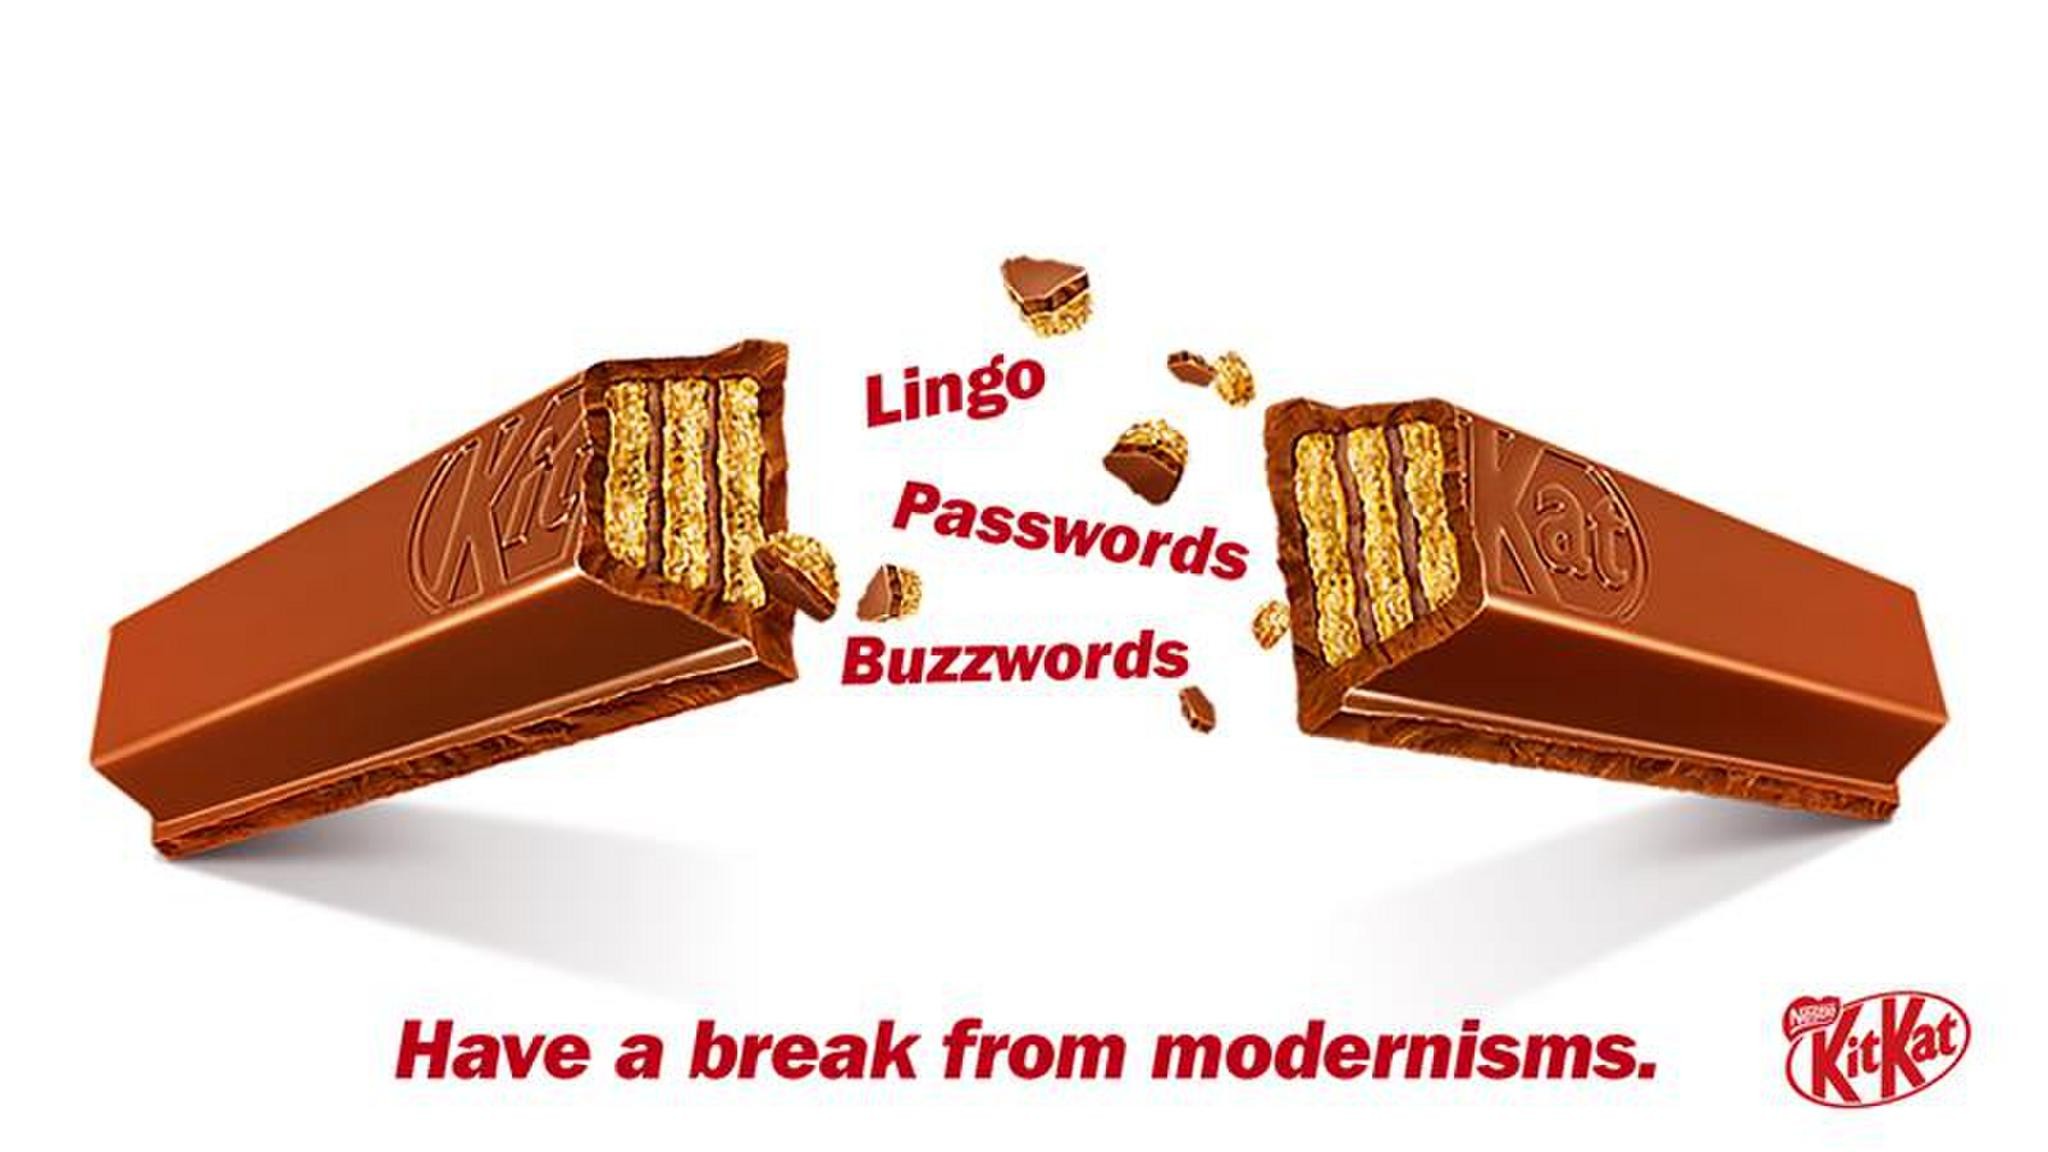 Have a break from modernisms